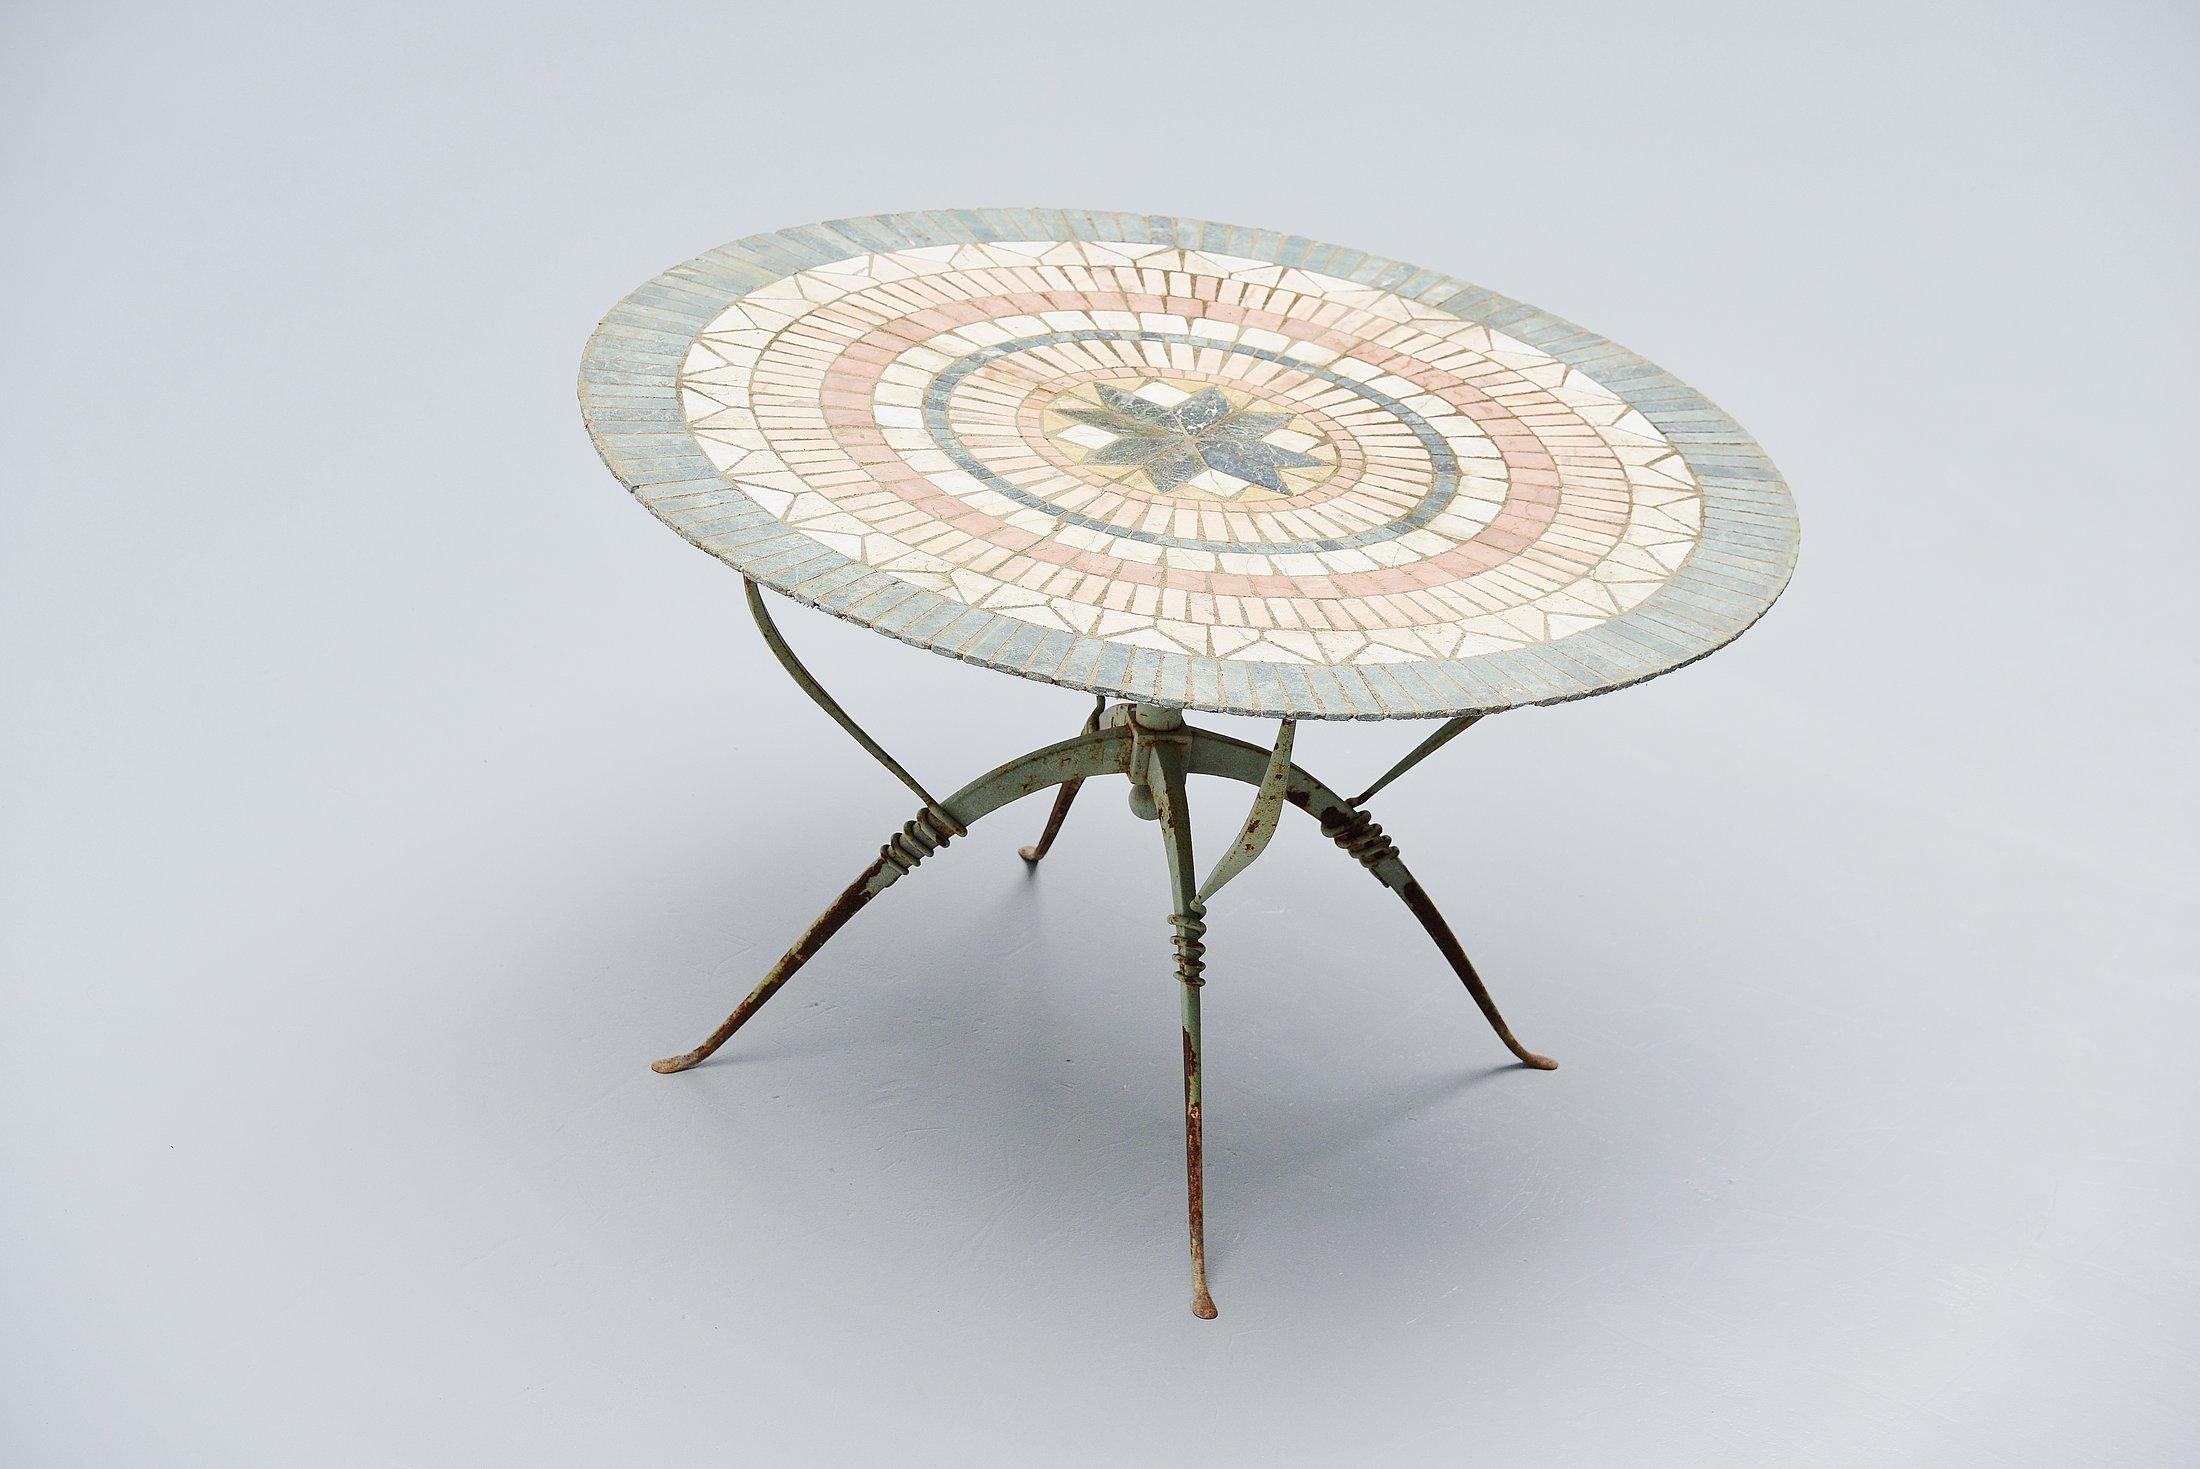 Very nice and exceptional veranda table designed by Raymond Subes for Maison Dominique, France, 1930. This table base is made of mint green painted wrought iron and is fantastic shaped. This is for the first time I see the table with original top,